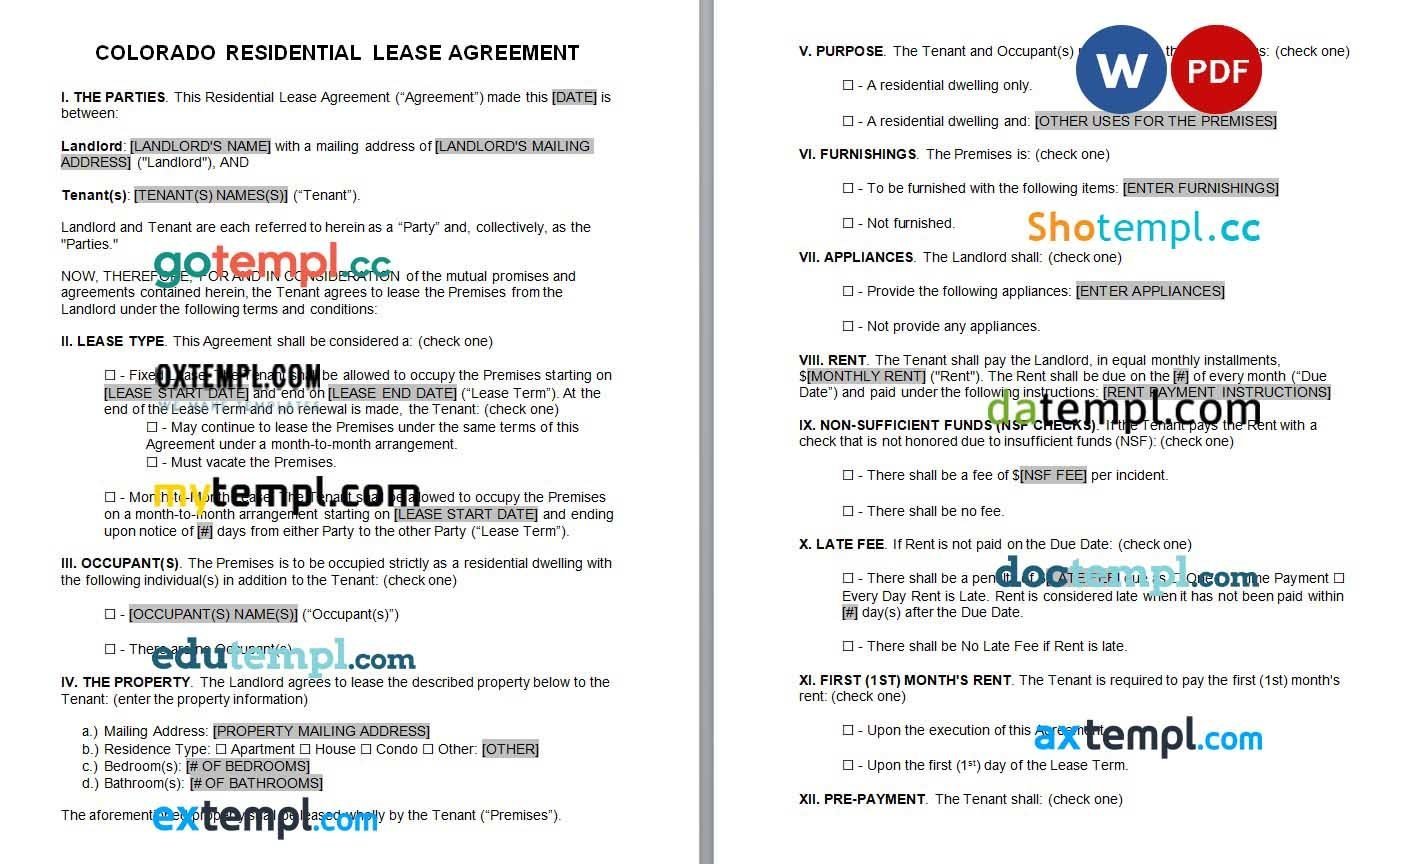 Colorado Standard Lease Agreement Word example, fully editable